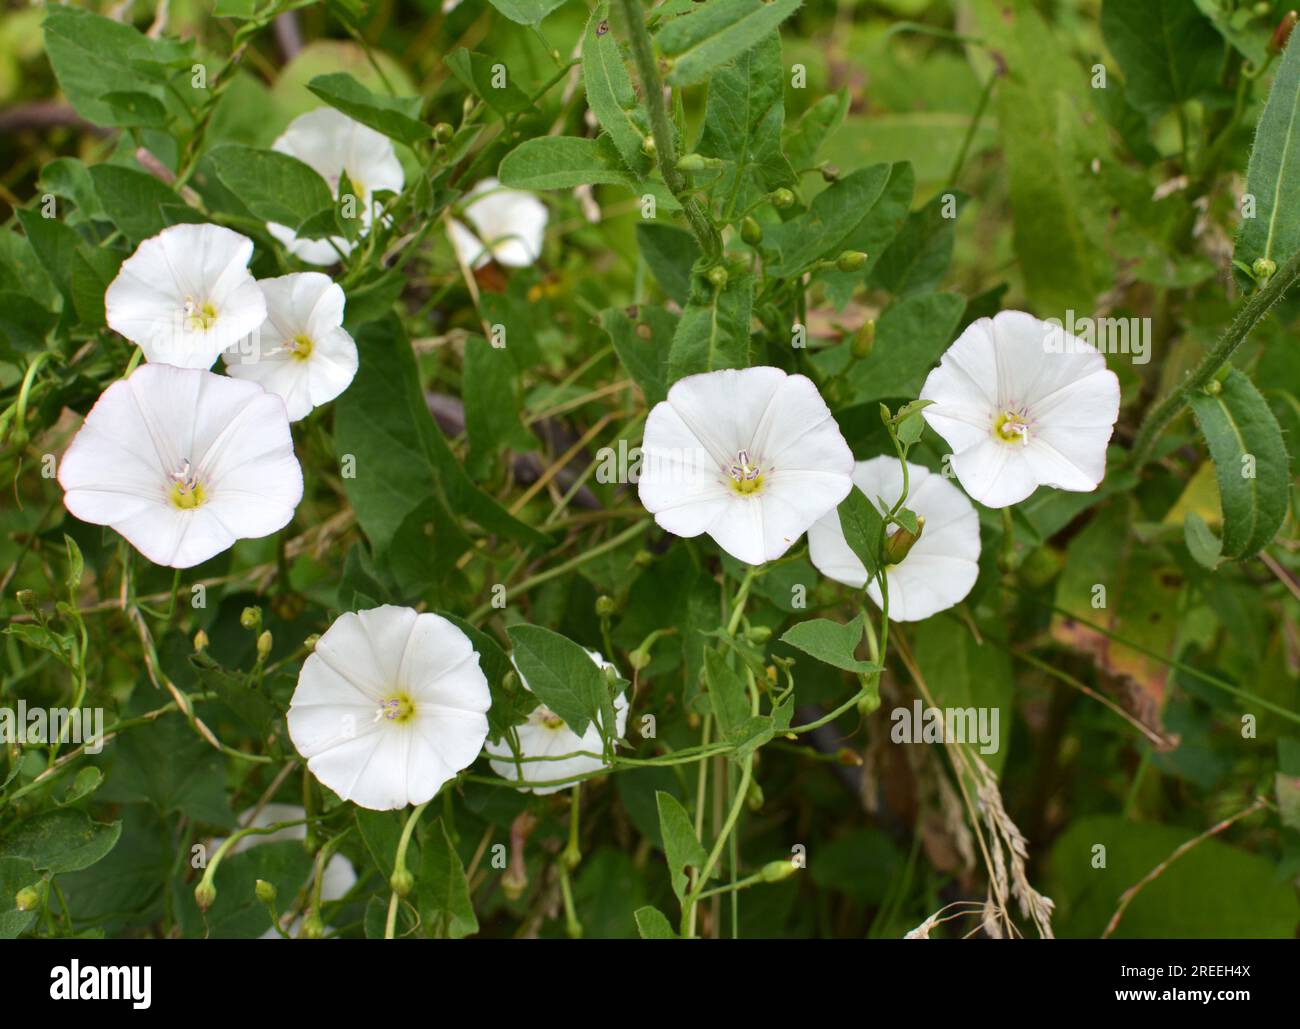 Convolvulus arvensis grows and blooms in the field Stock Photo